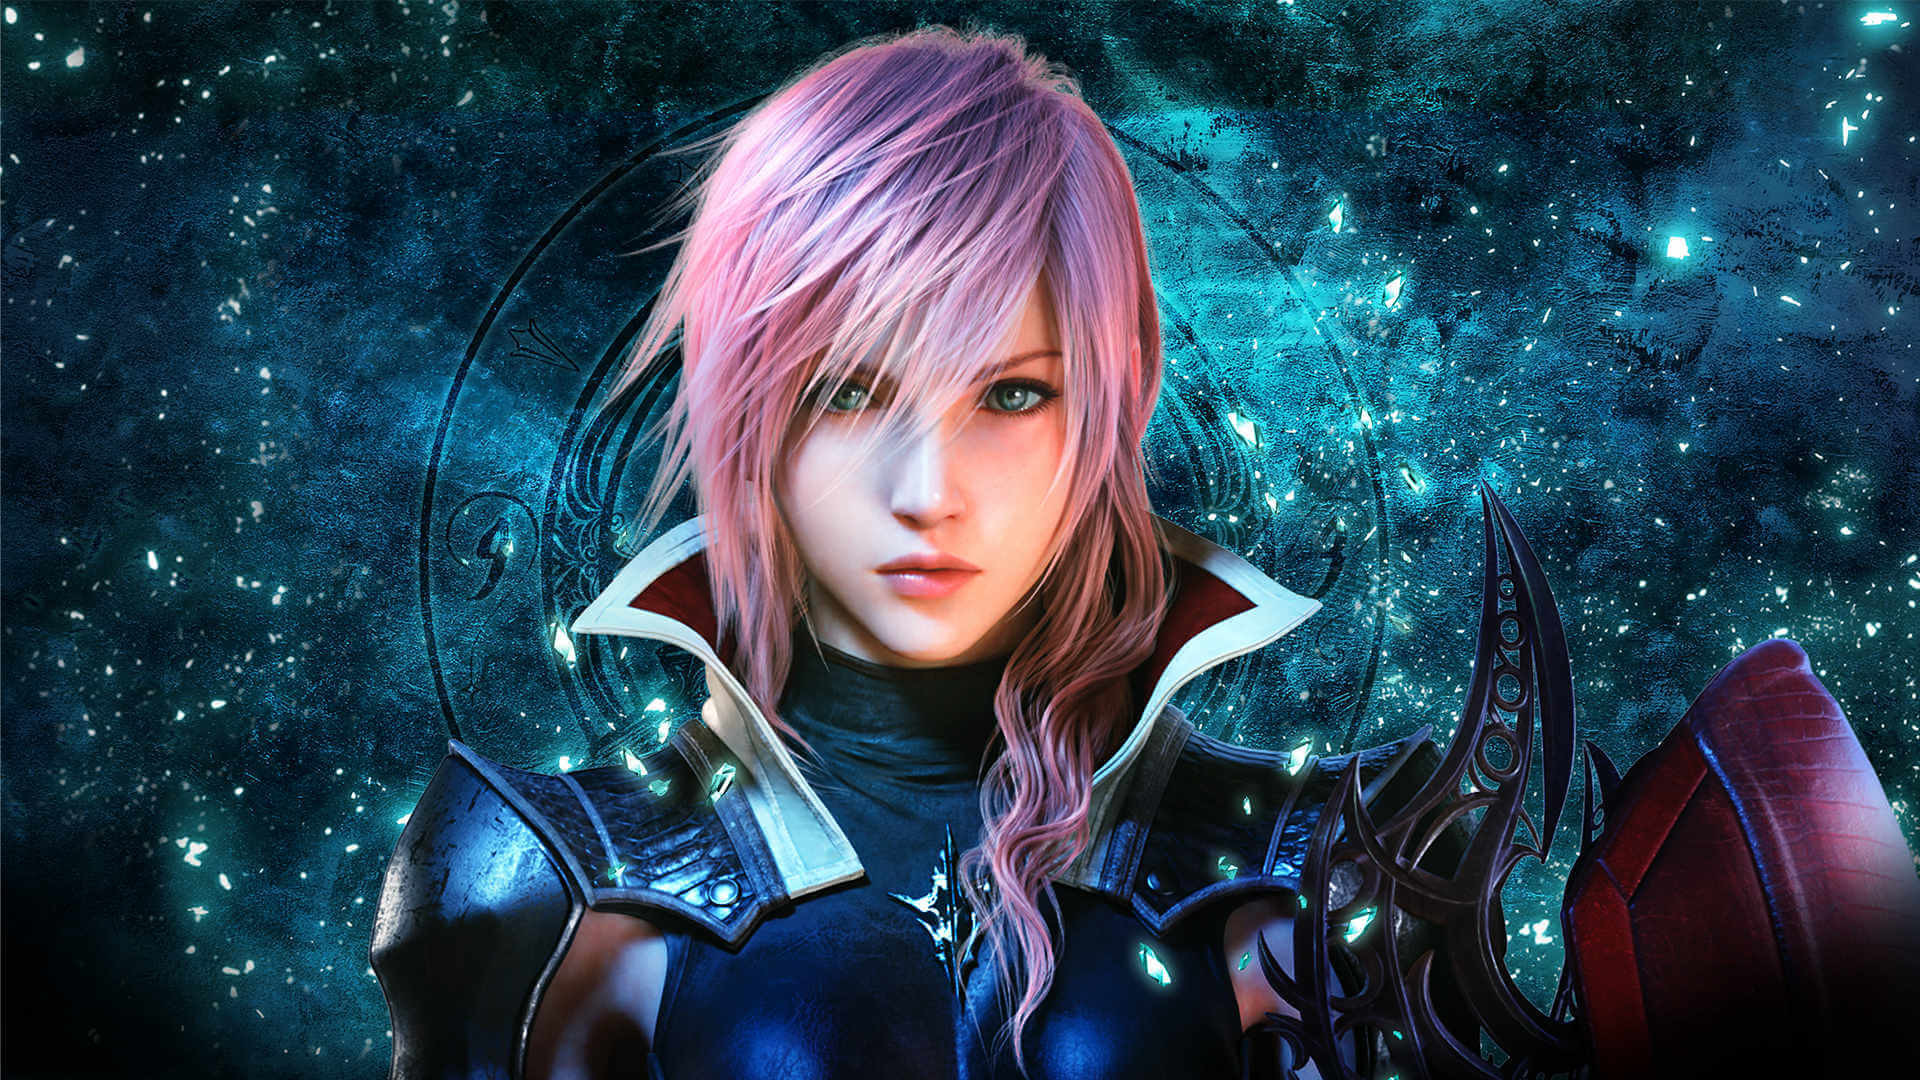 1920x1080 Let's Give Lightning a Little Love